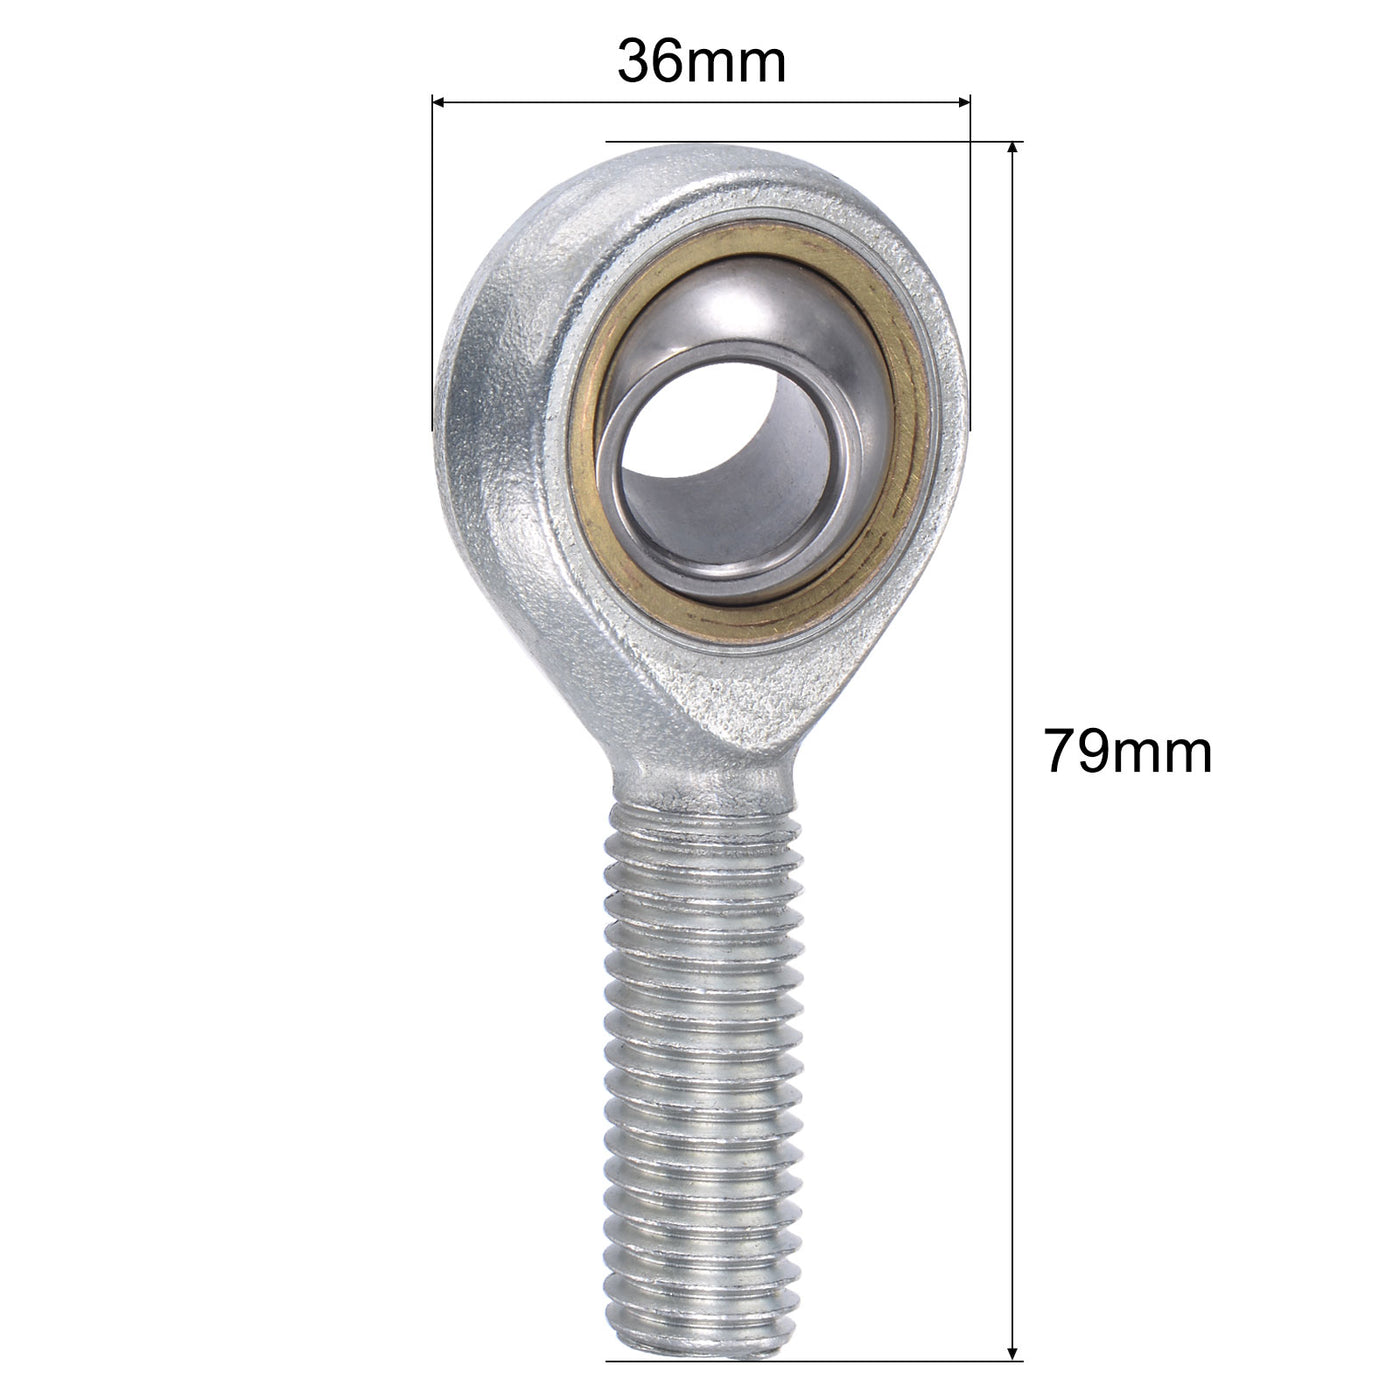 uxcell Uxcell SA25TK POSA25 Rod End Bearing 25mm Bore M25x2 Left Hand Male Thread